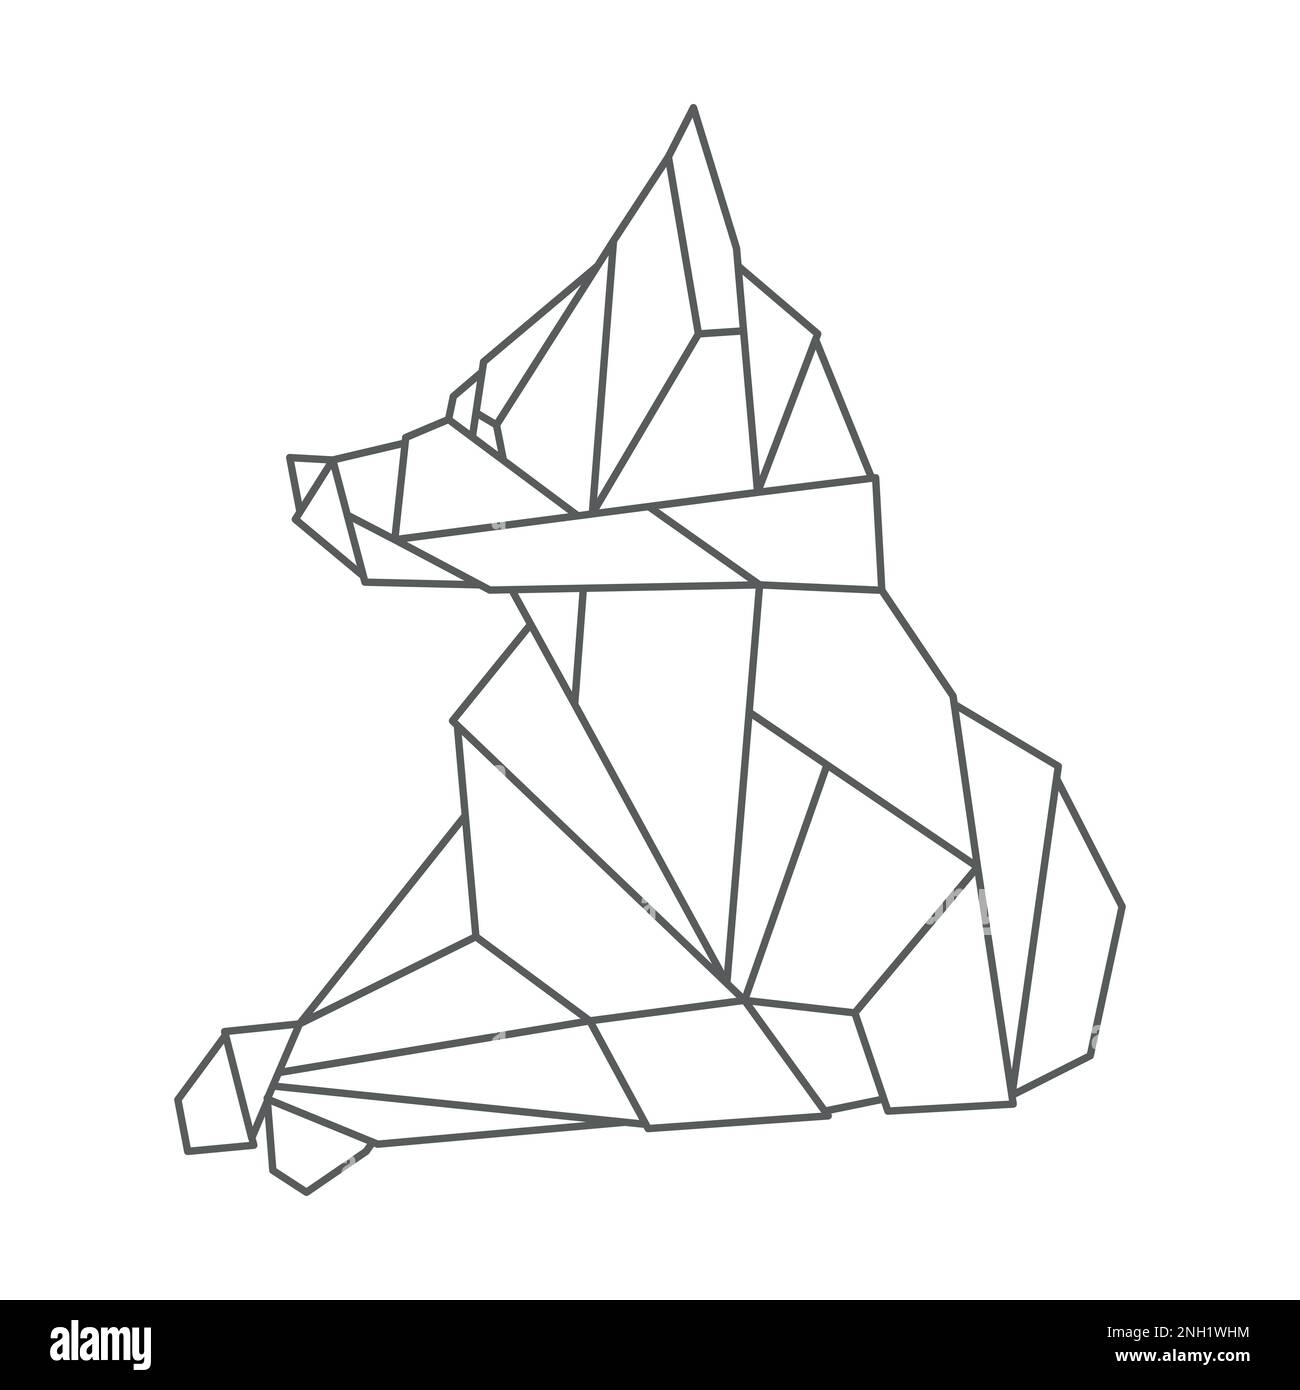 Fox rests lying down. Geometric linear wild animal. Abstract minimalistic illustration. Stylish modern clipart for design of branded products Stock Vector